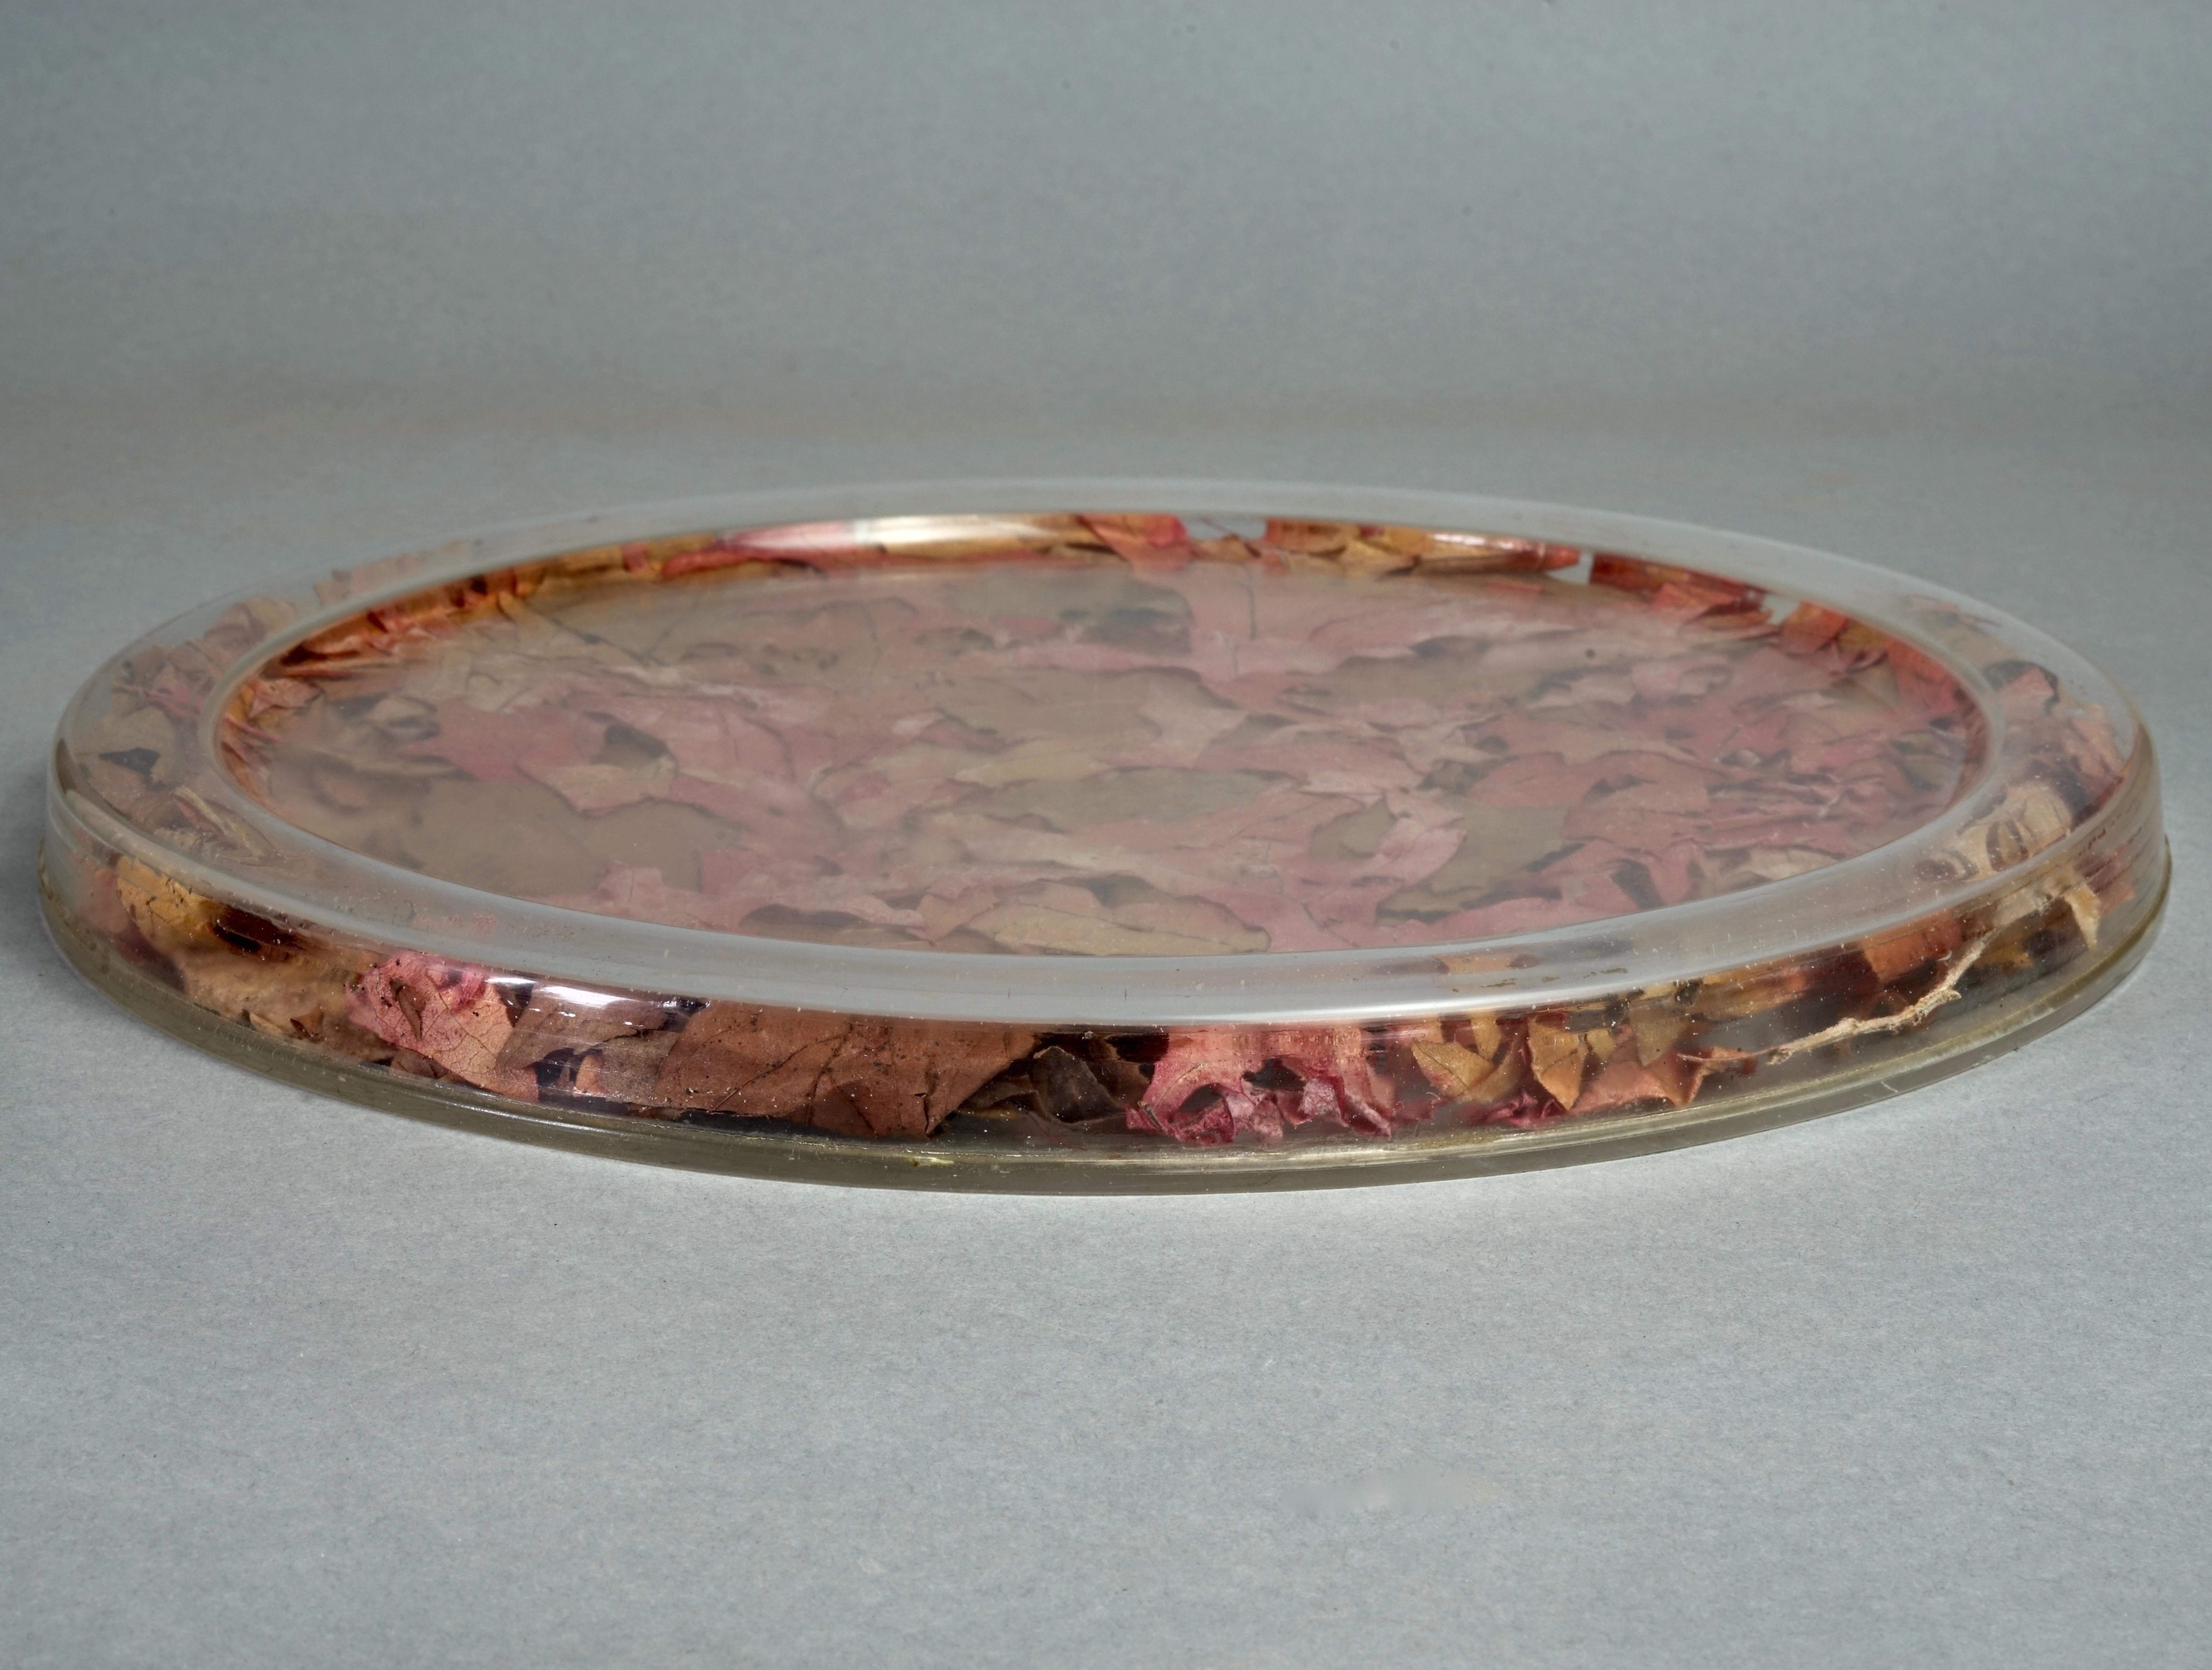 Brown Vintage 1970s CHRISTIAN DIOR Autumn Leaves Lucite Serving Tray For Sale